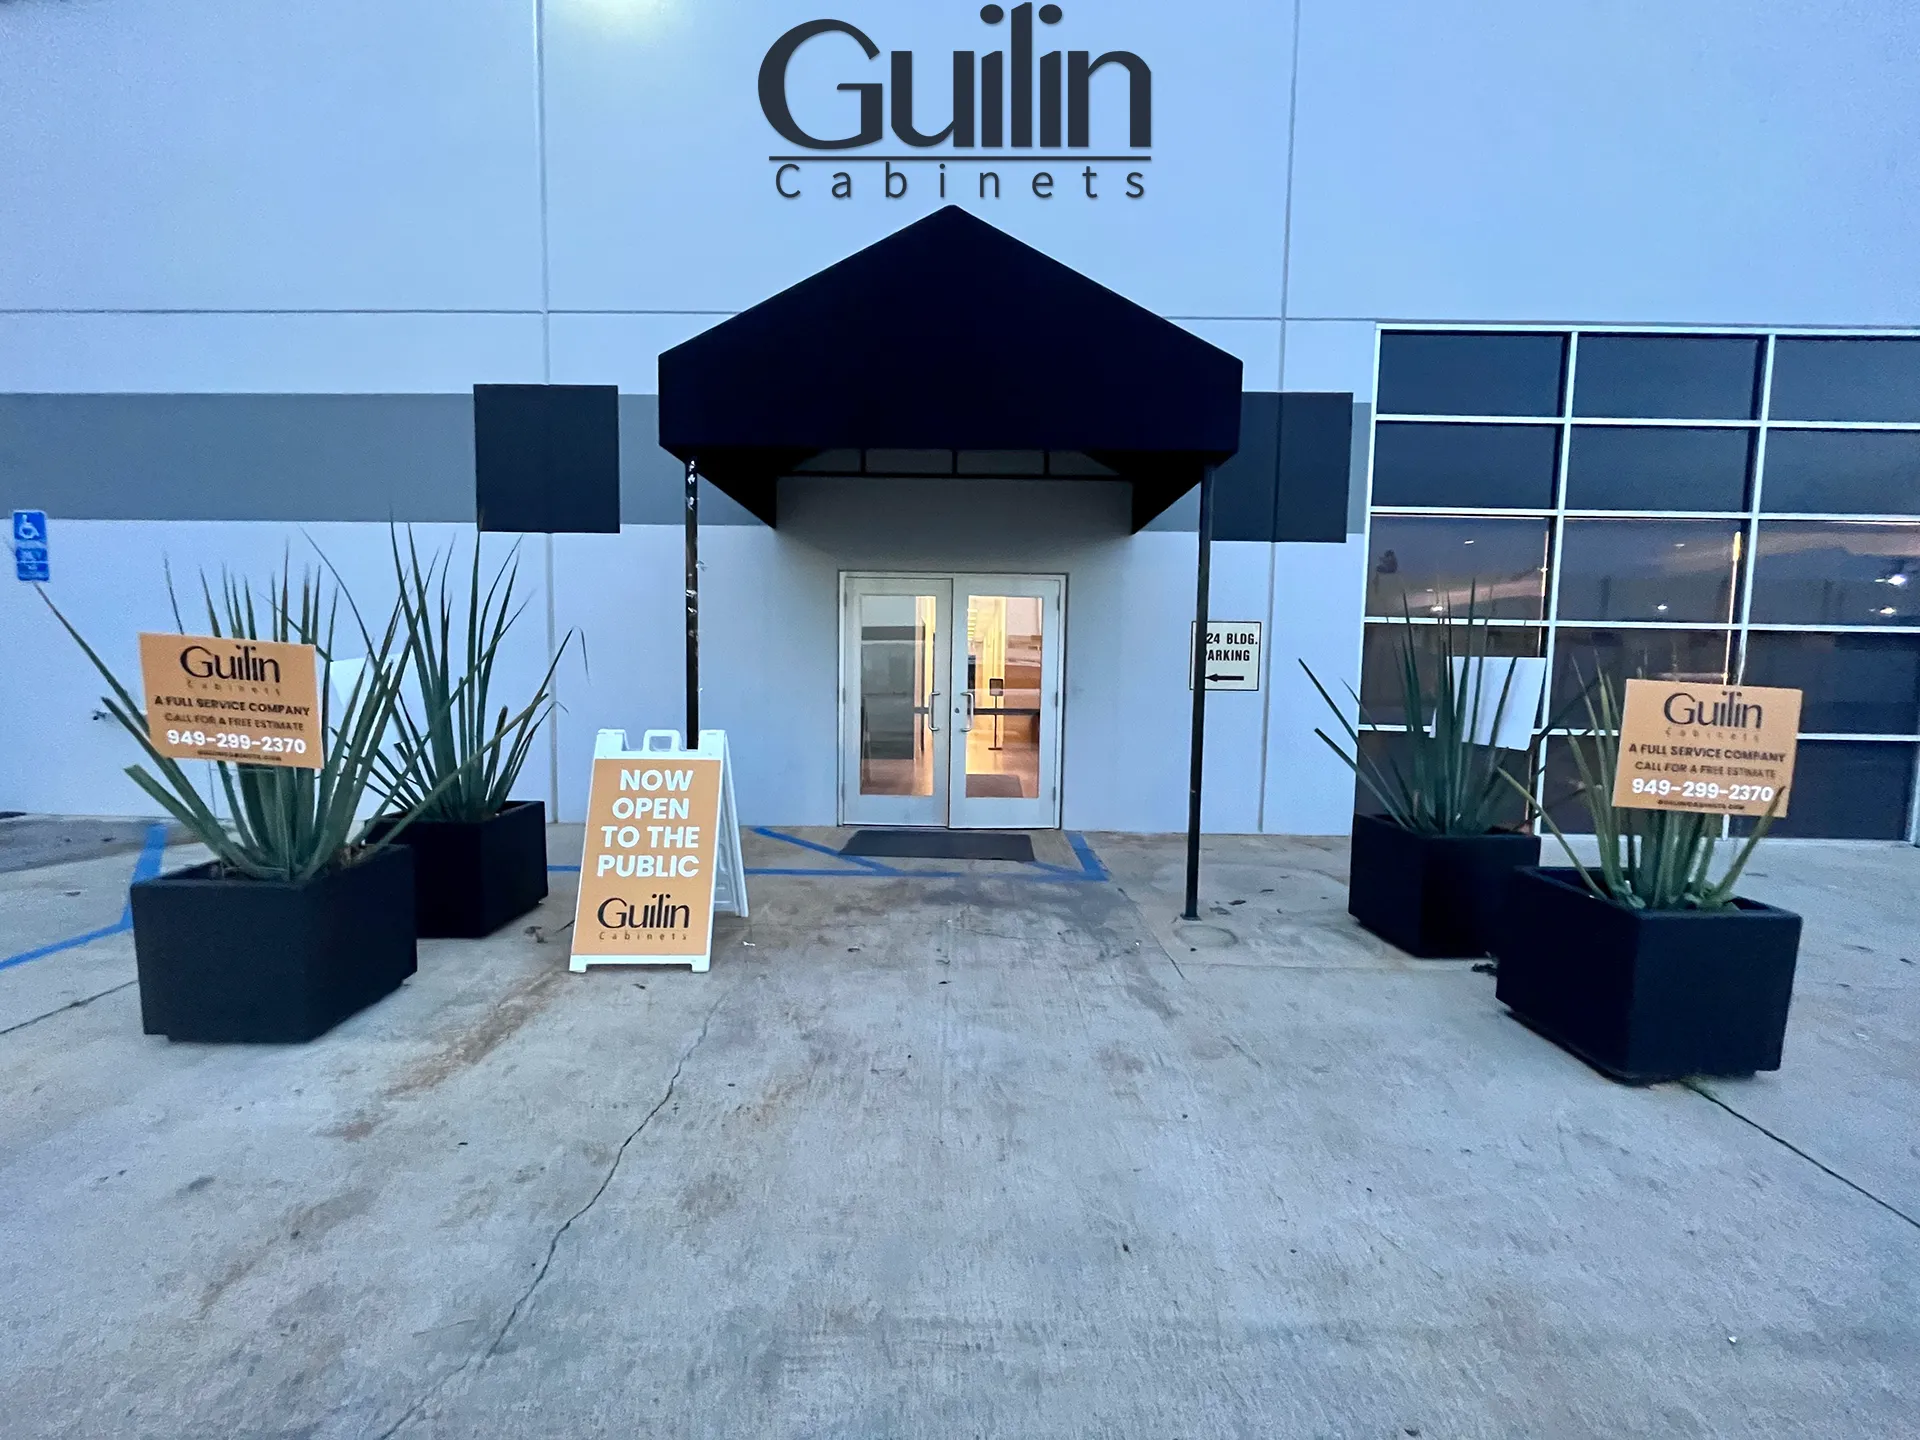 Our showroom is available for in-person visits at 1924 Barranca Pkwy Irvine, CA, so you can get a feel and live look at the quality of our work.